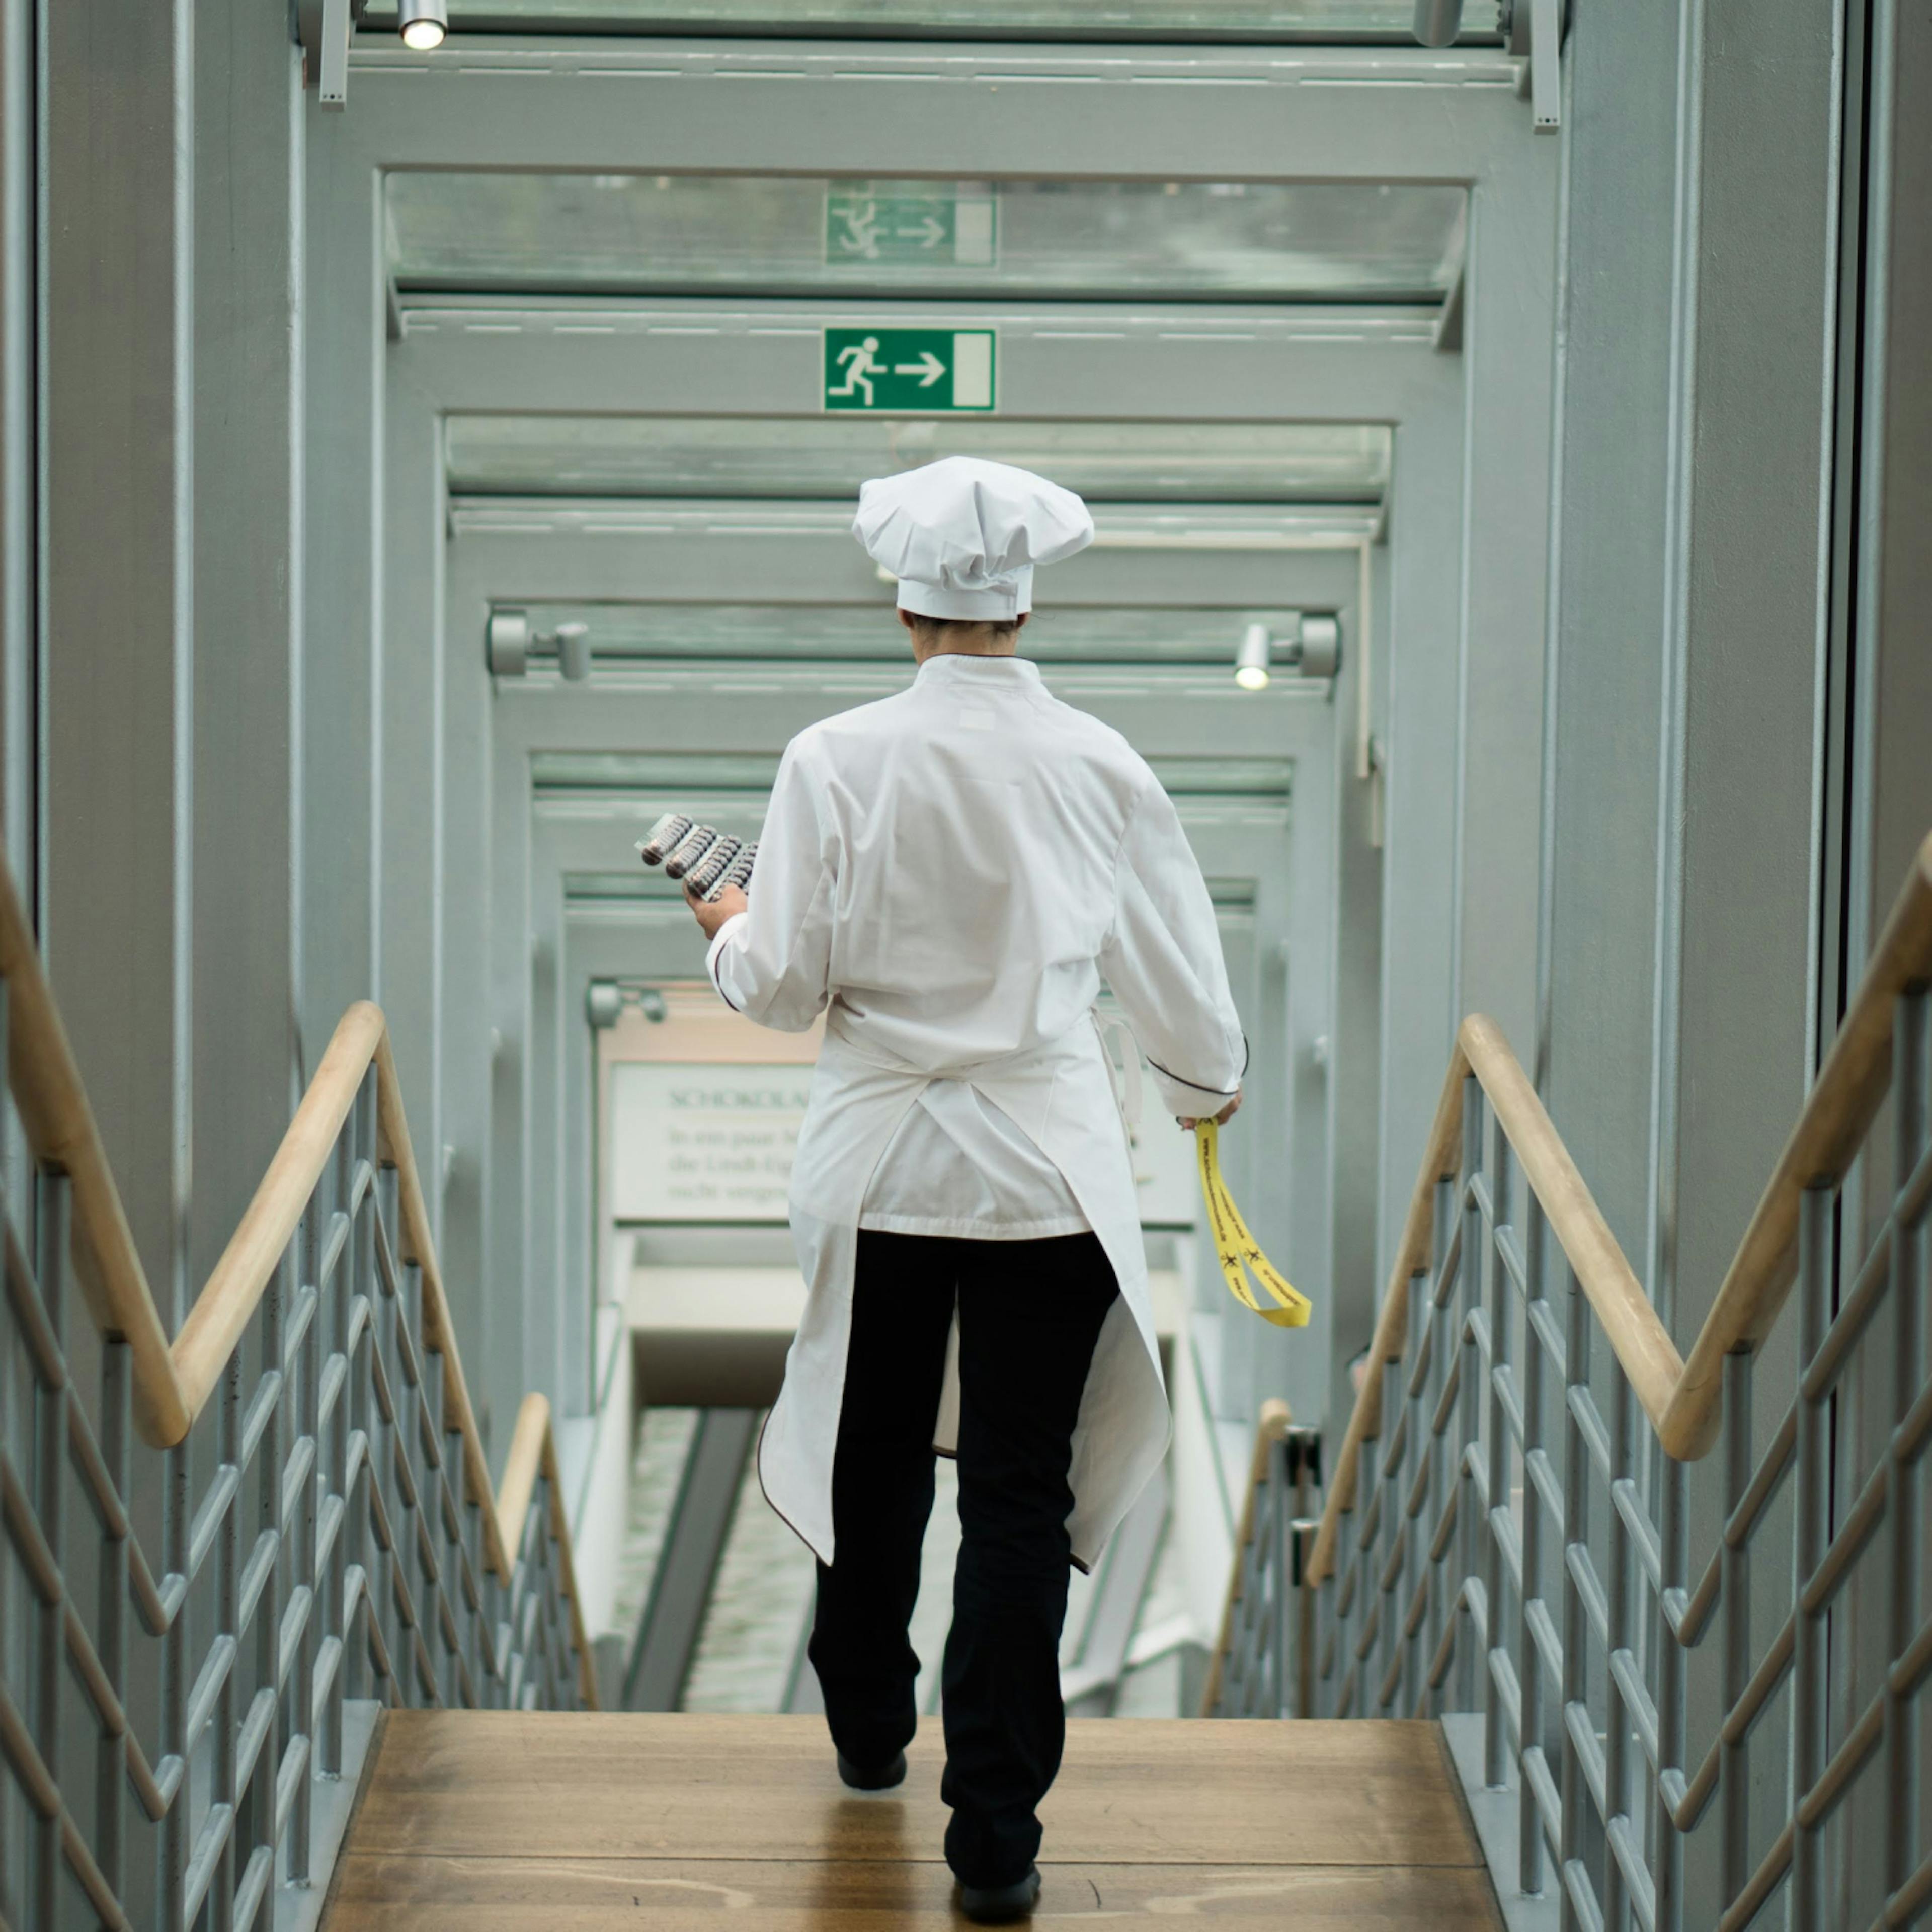 Chef walking down stairs